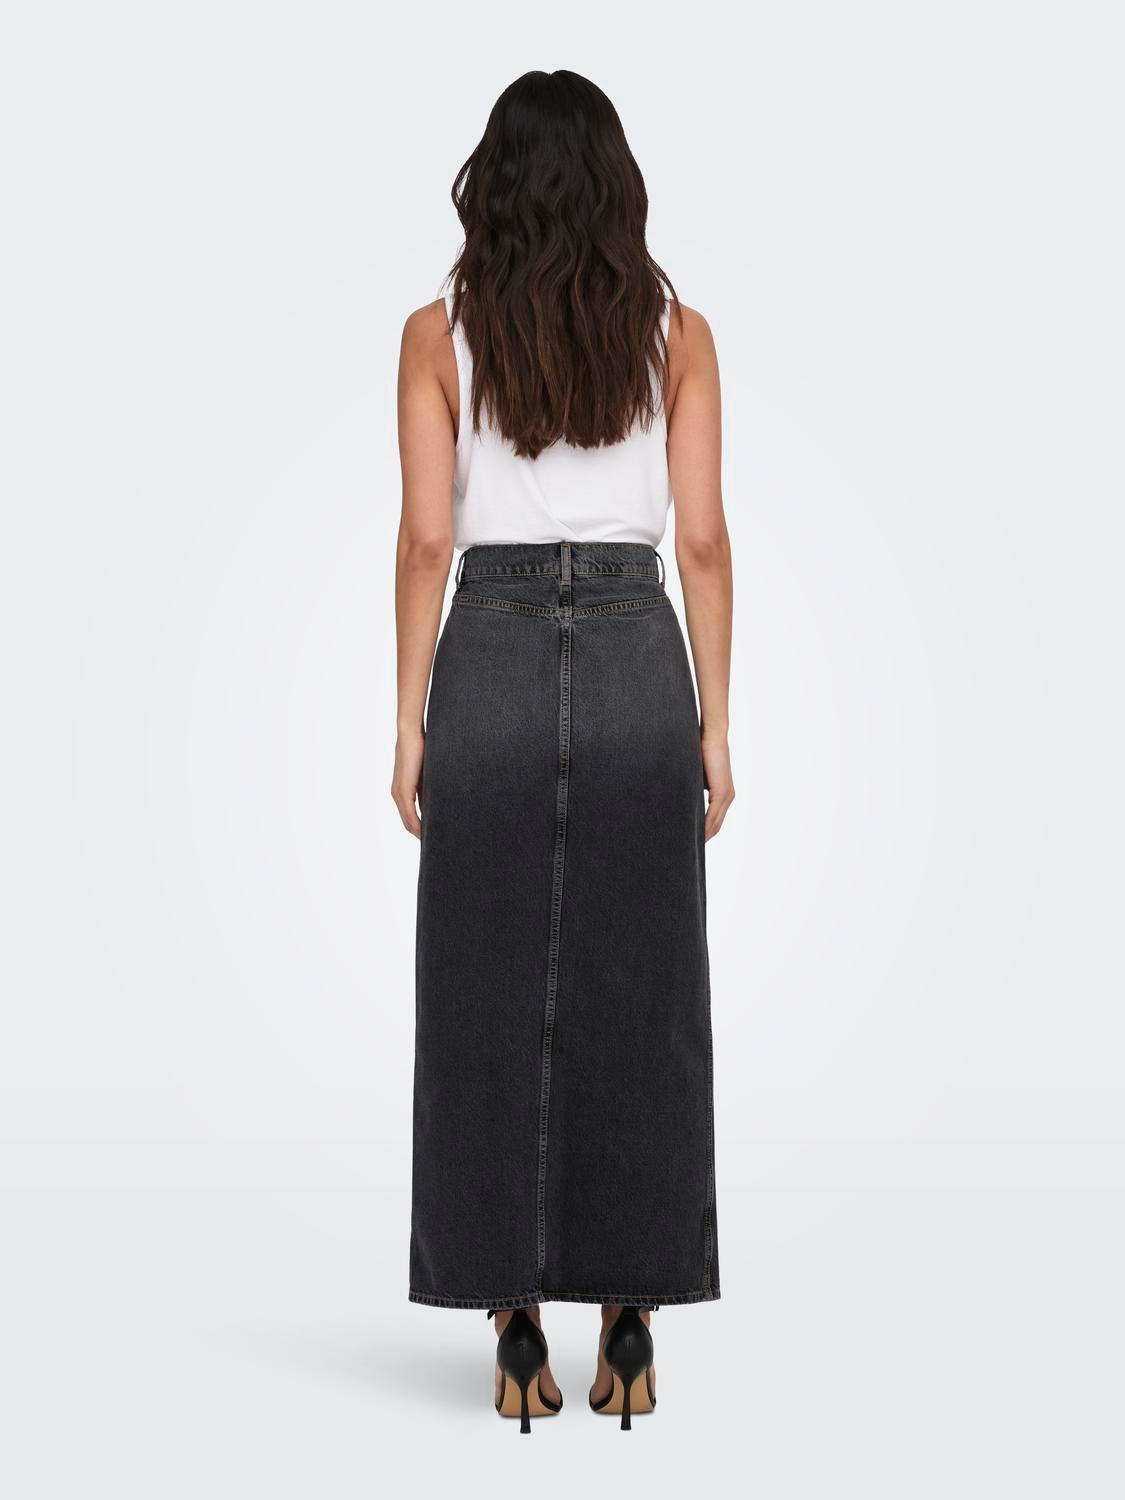 ONLY Mid waist Long skirt -Washed Black - 15320571